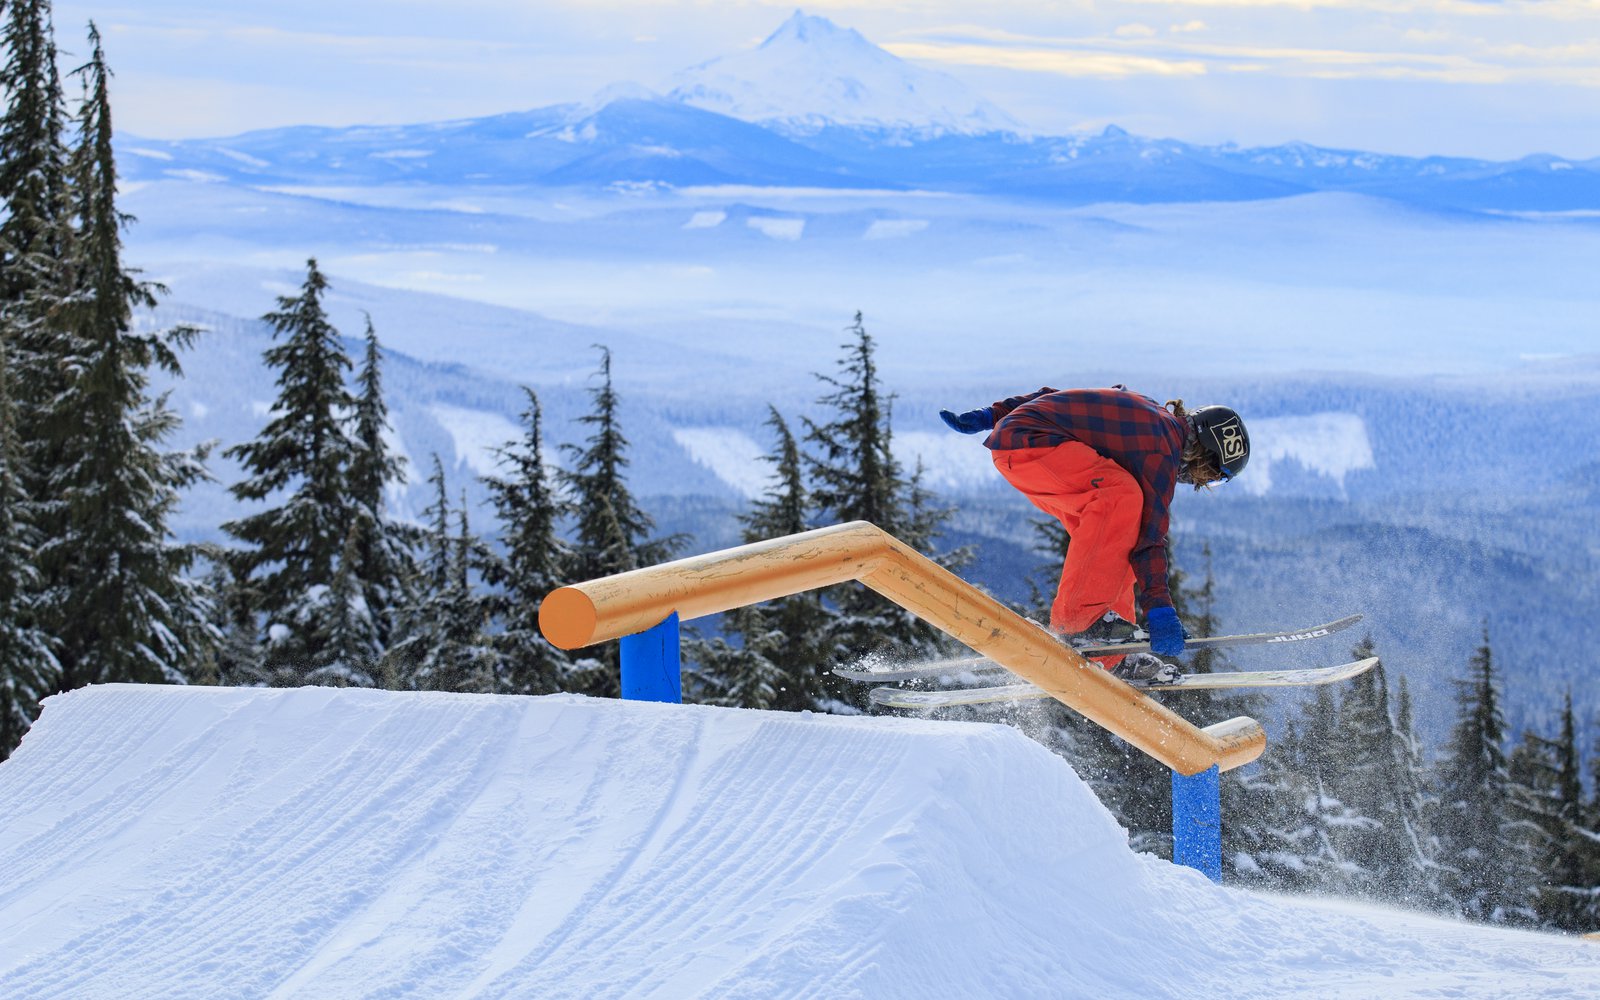  Grabs, Rails, Mountains, Oh My.